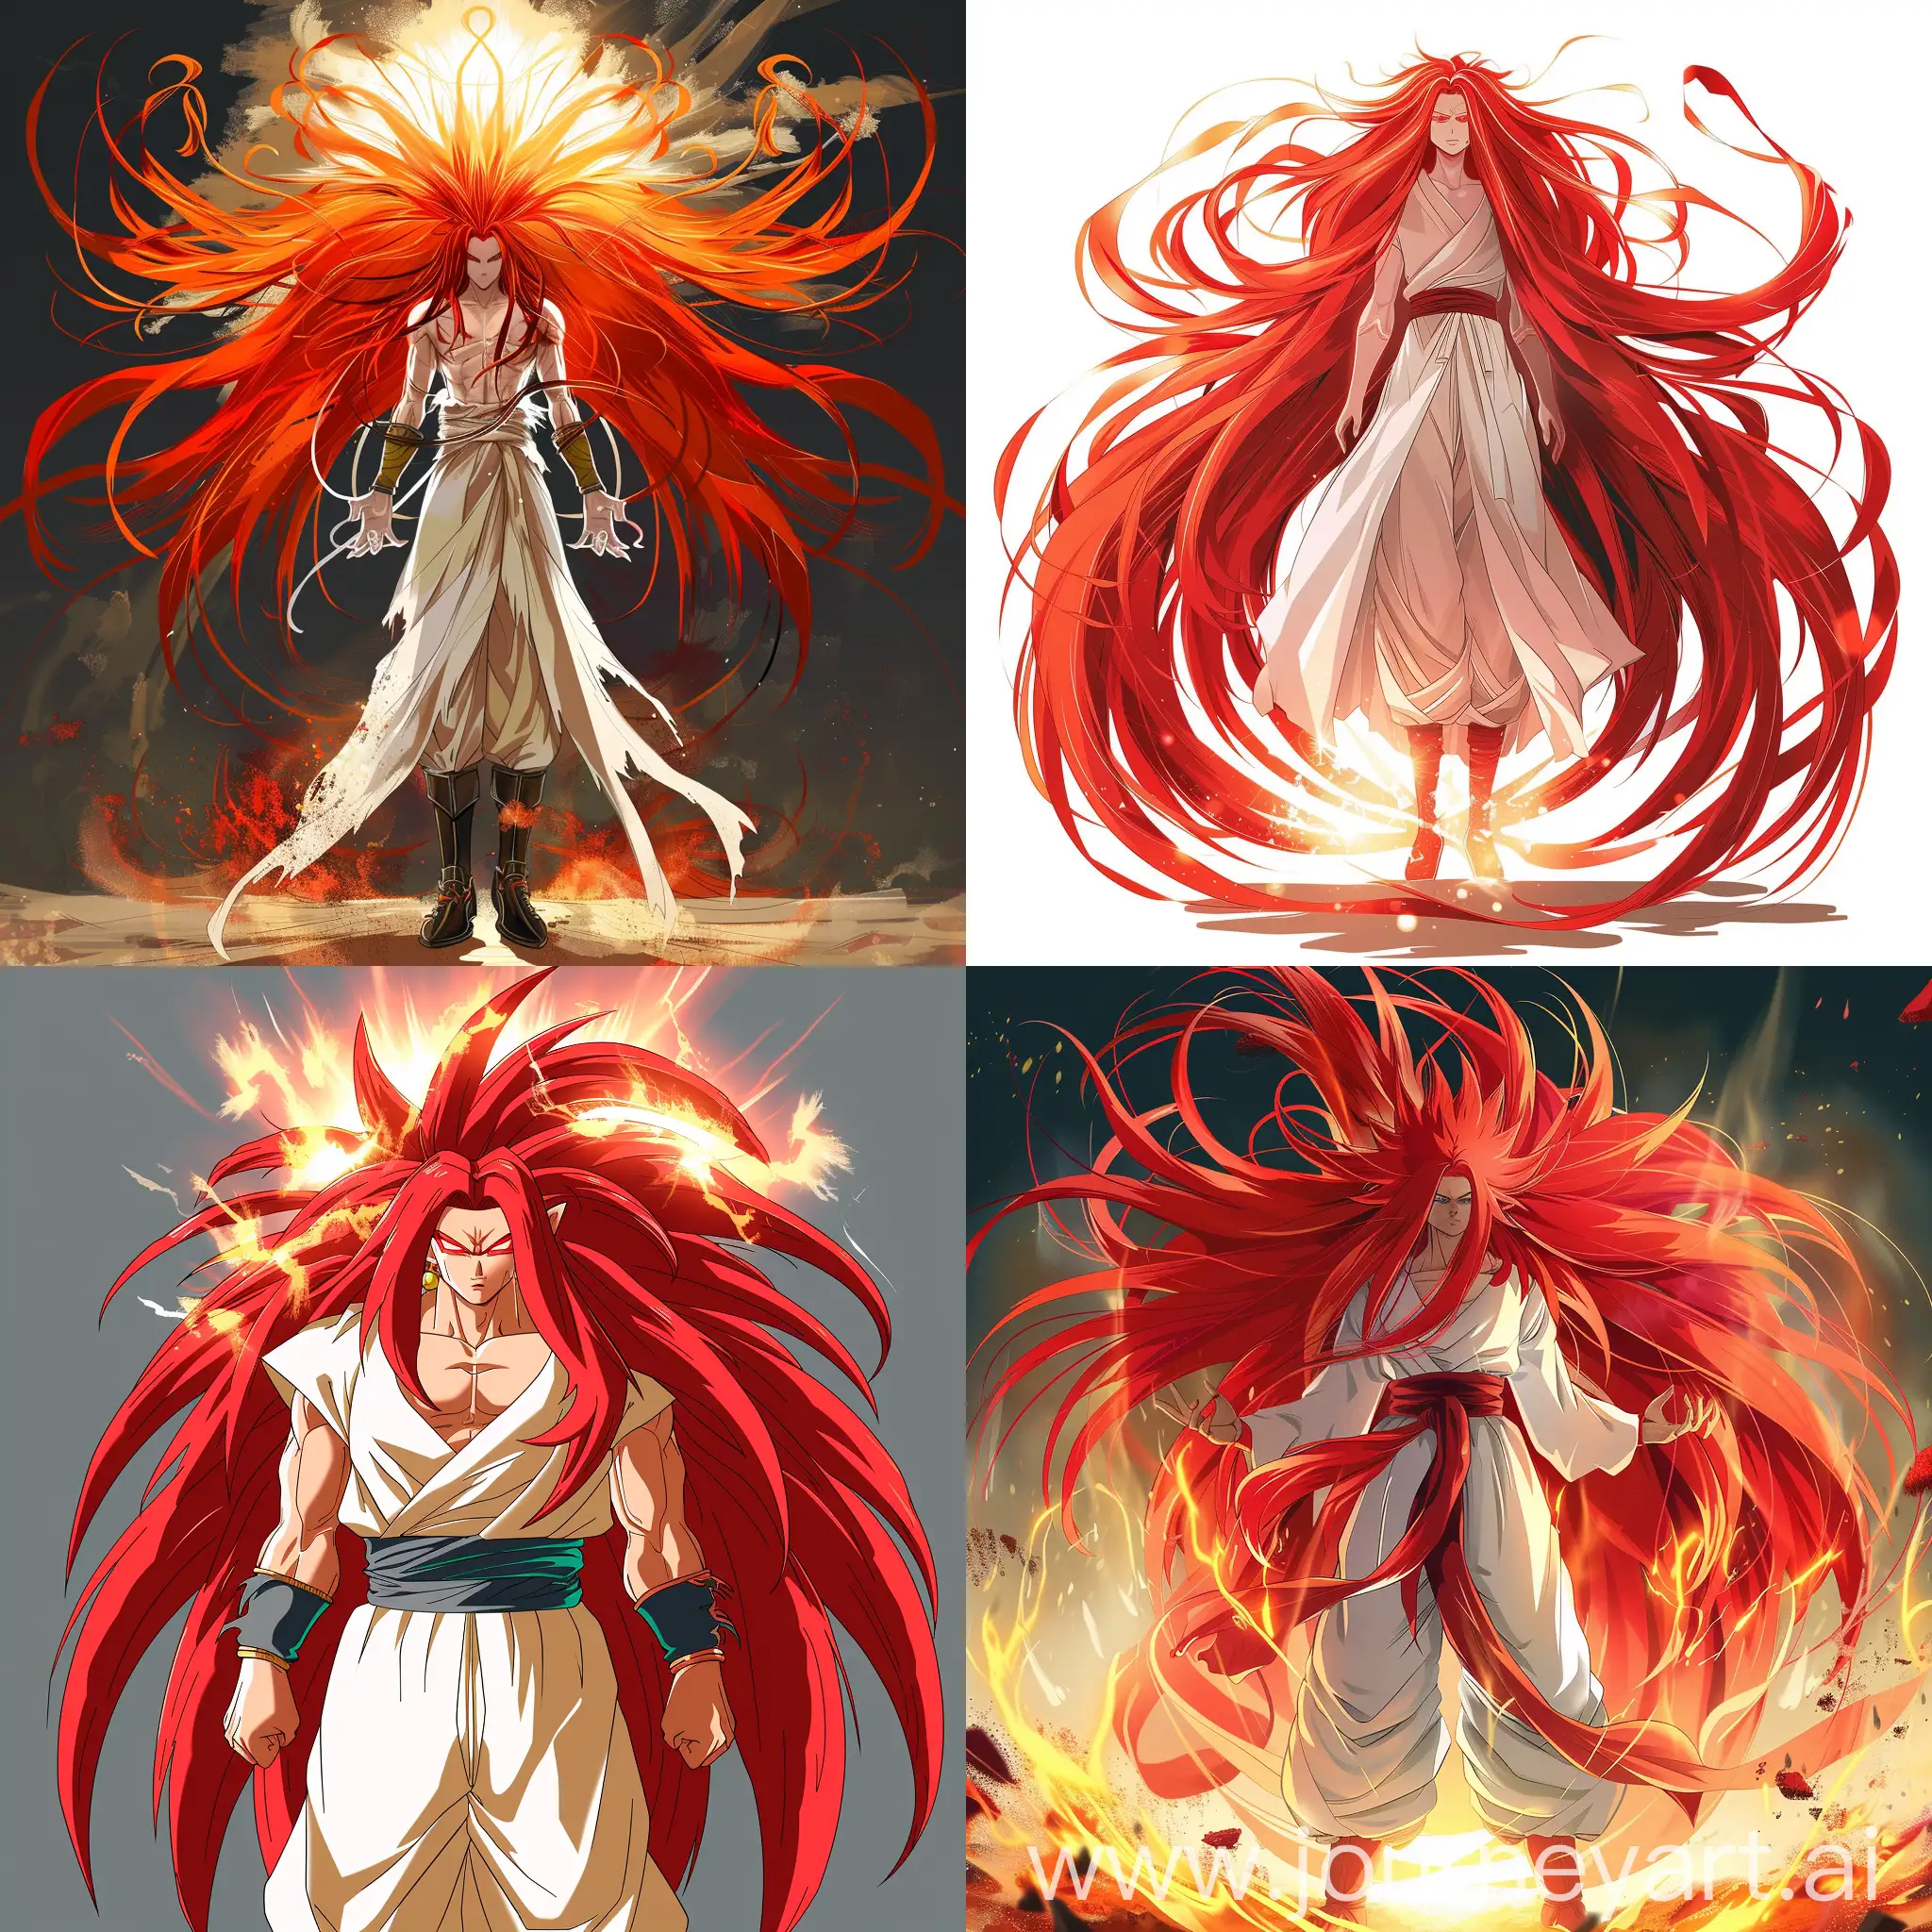 An anime style long red hair transformation of a light hero, similar to the supersaiyayin transformation of Goku, from Dragon Ball.